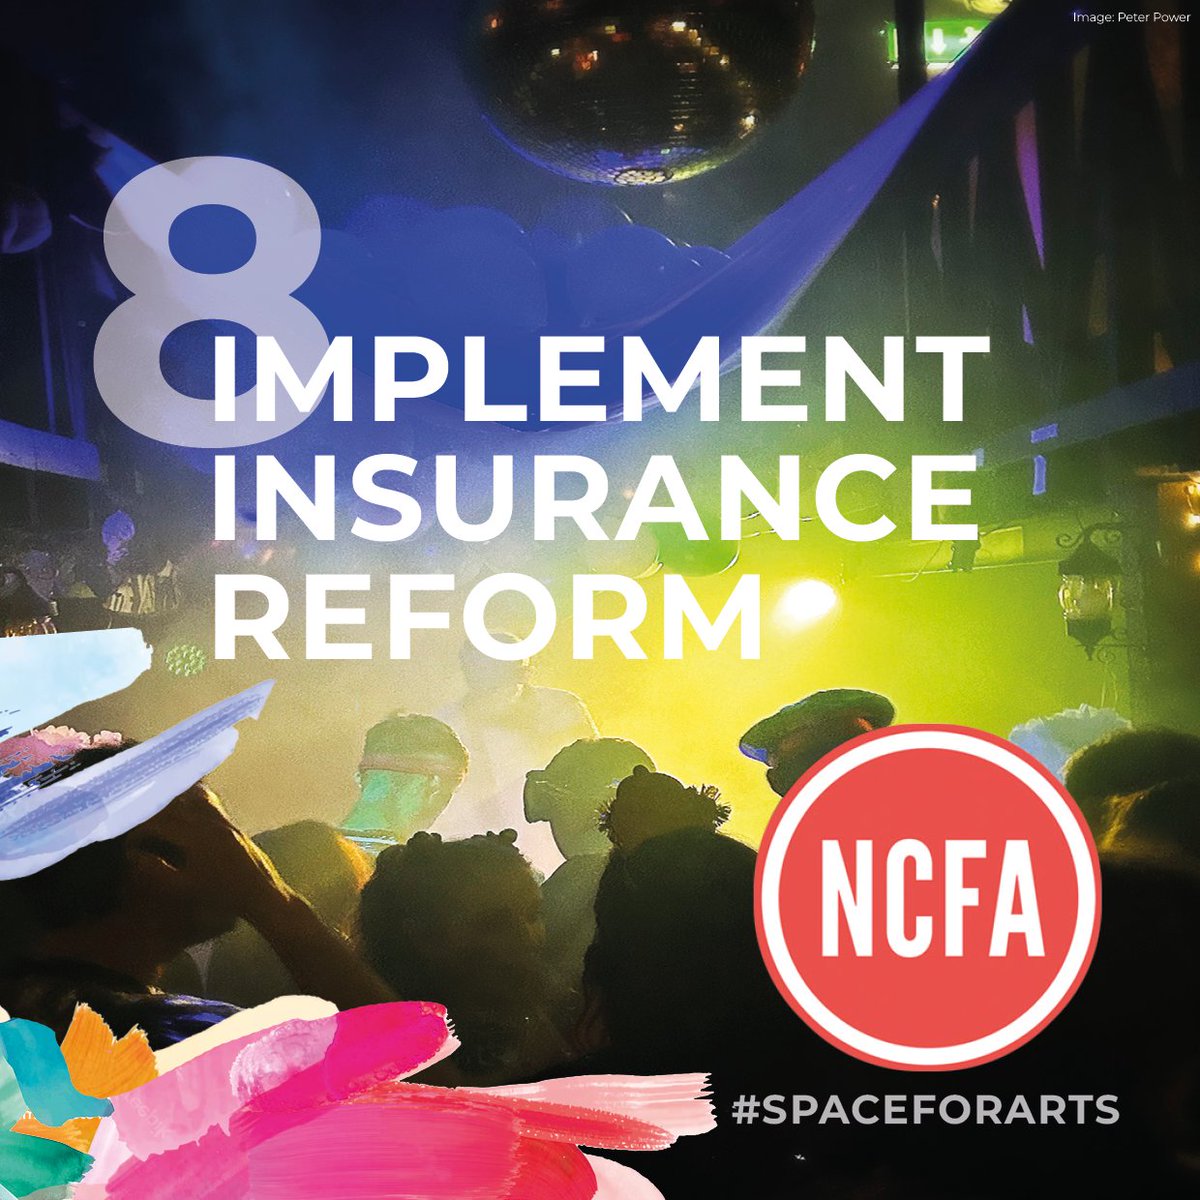 Inadequate, inaccessible and unsustainably expensive insurance is an issue for artists, arts workers and organisations. We call on government to implement insurance reform. Read the NCFA pre budget submission in full on our website and support the campaignq #spaceforarts